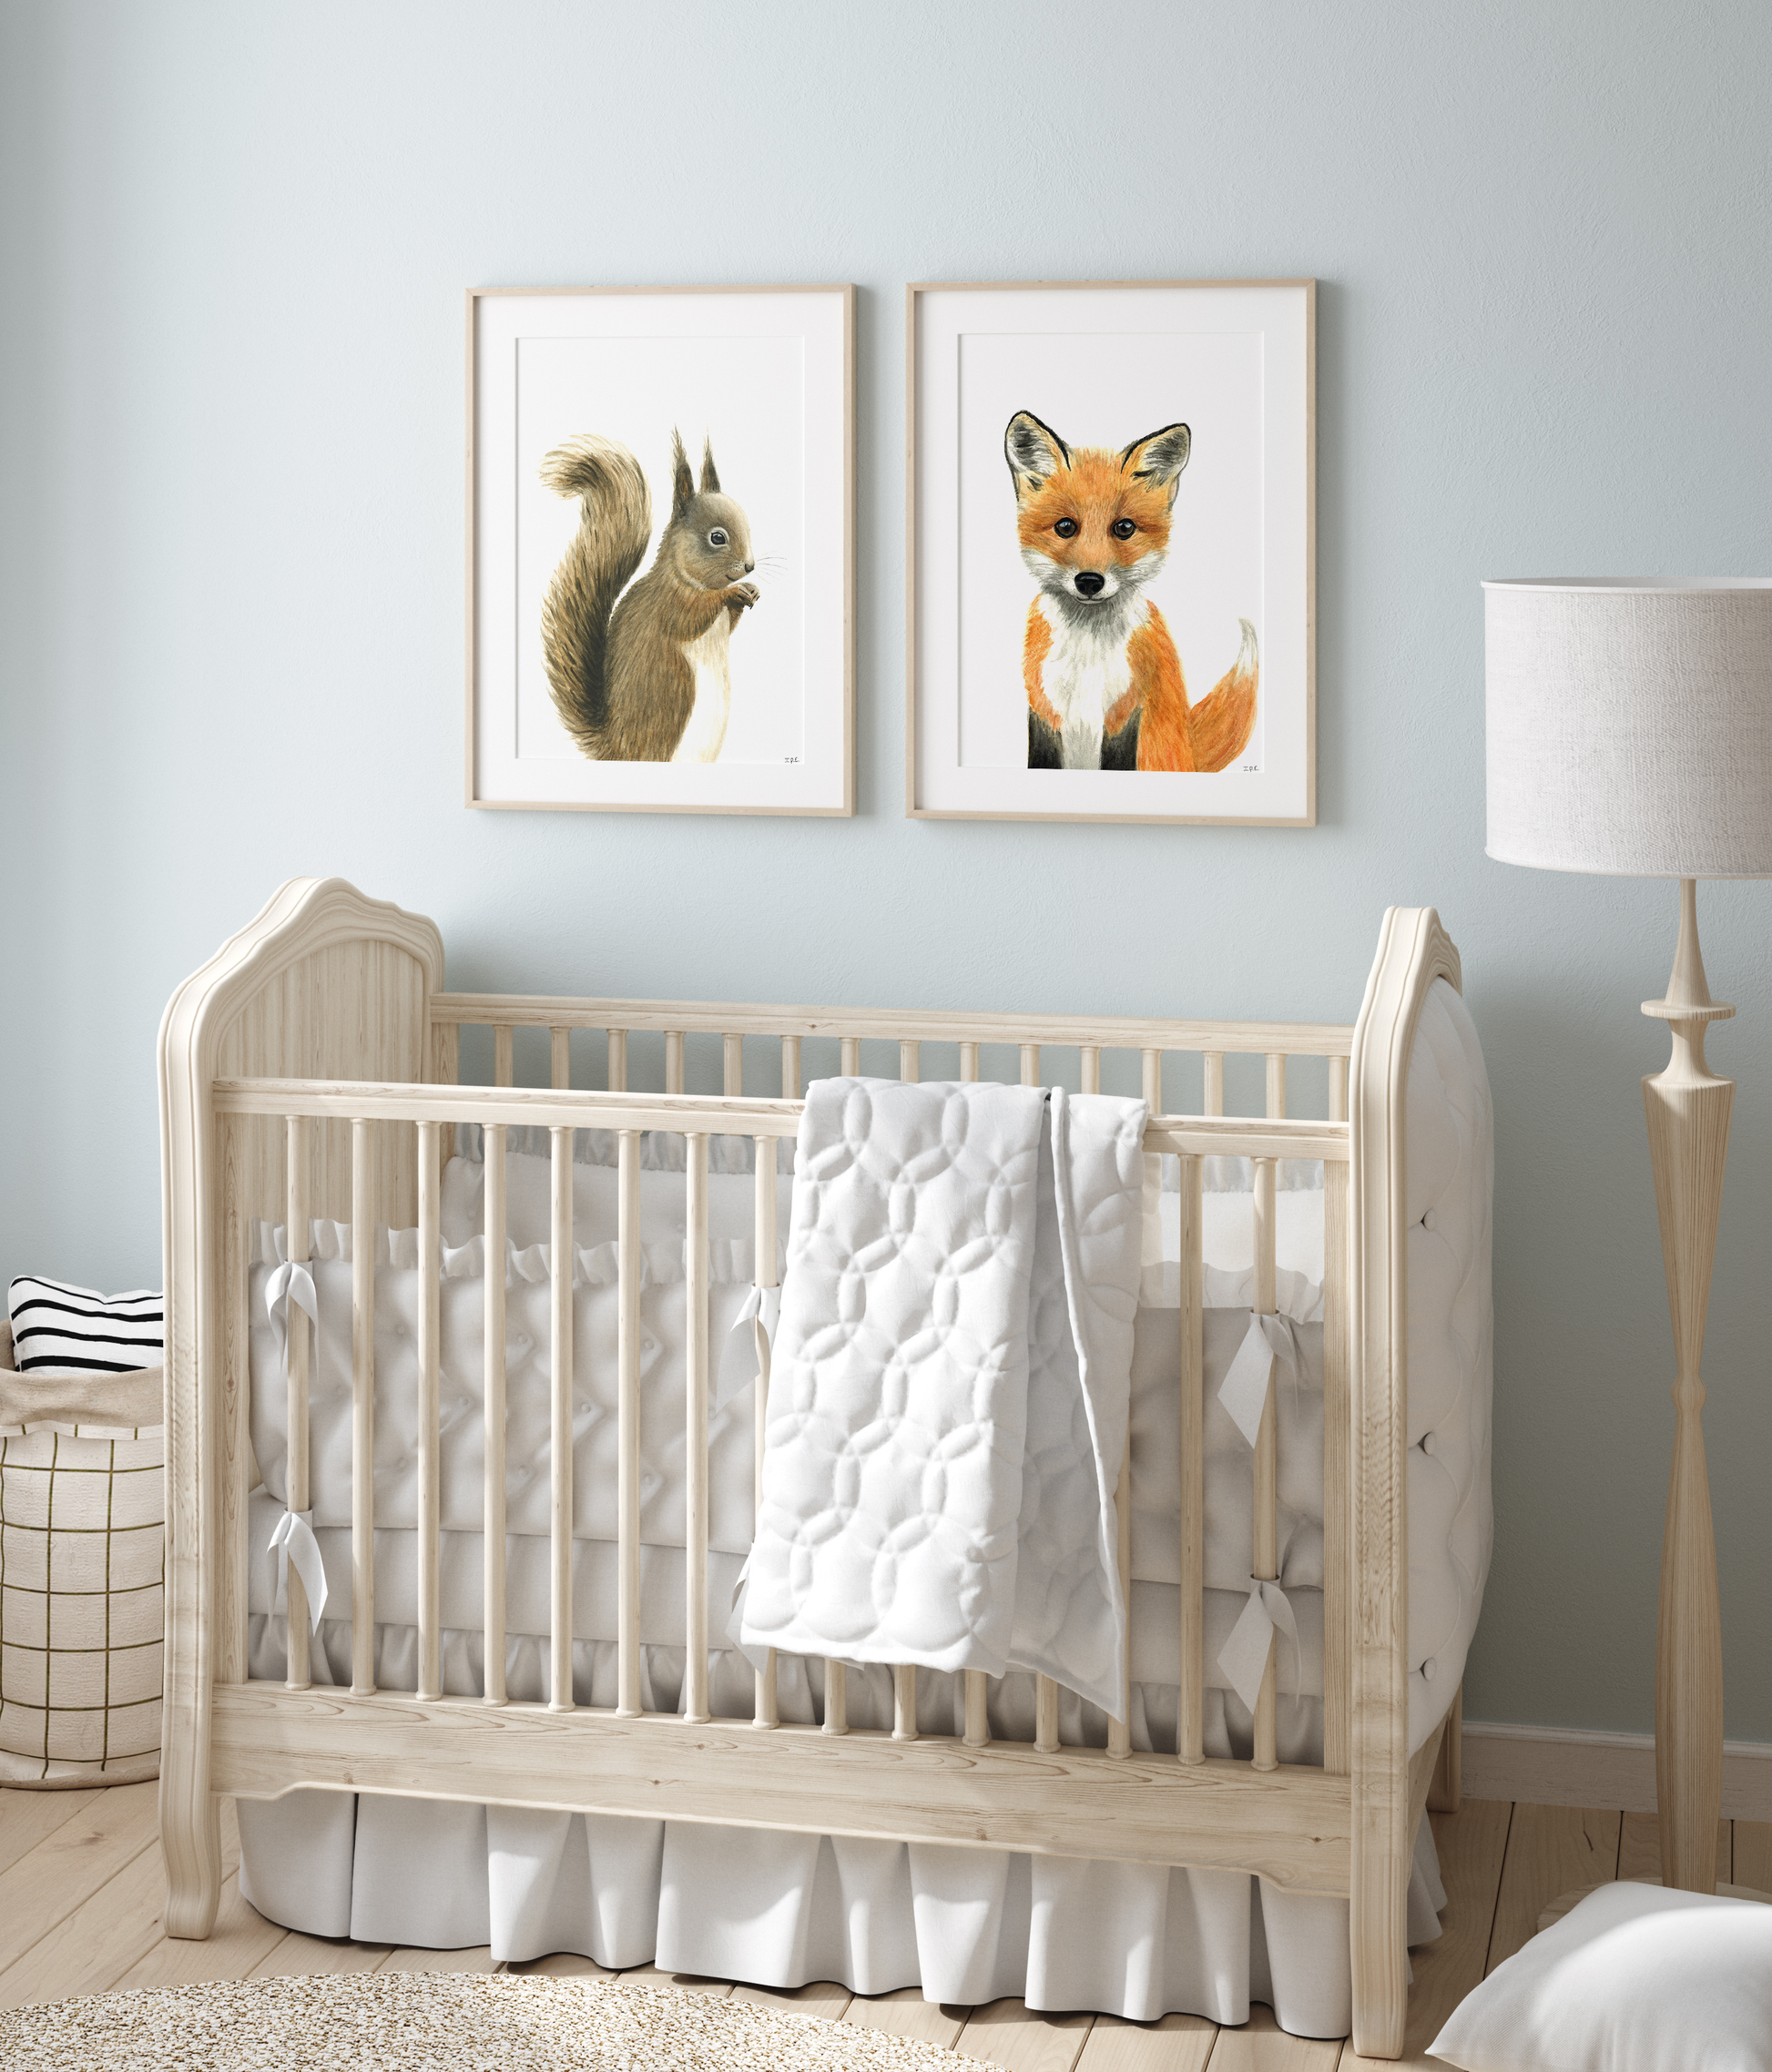 Set of 2 woodland animal prints in a nursery: squirrel and fox